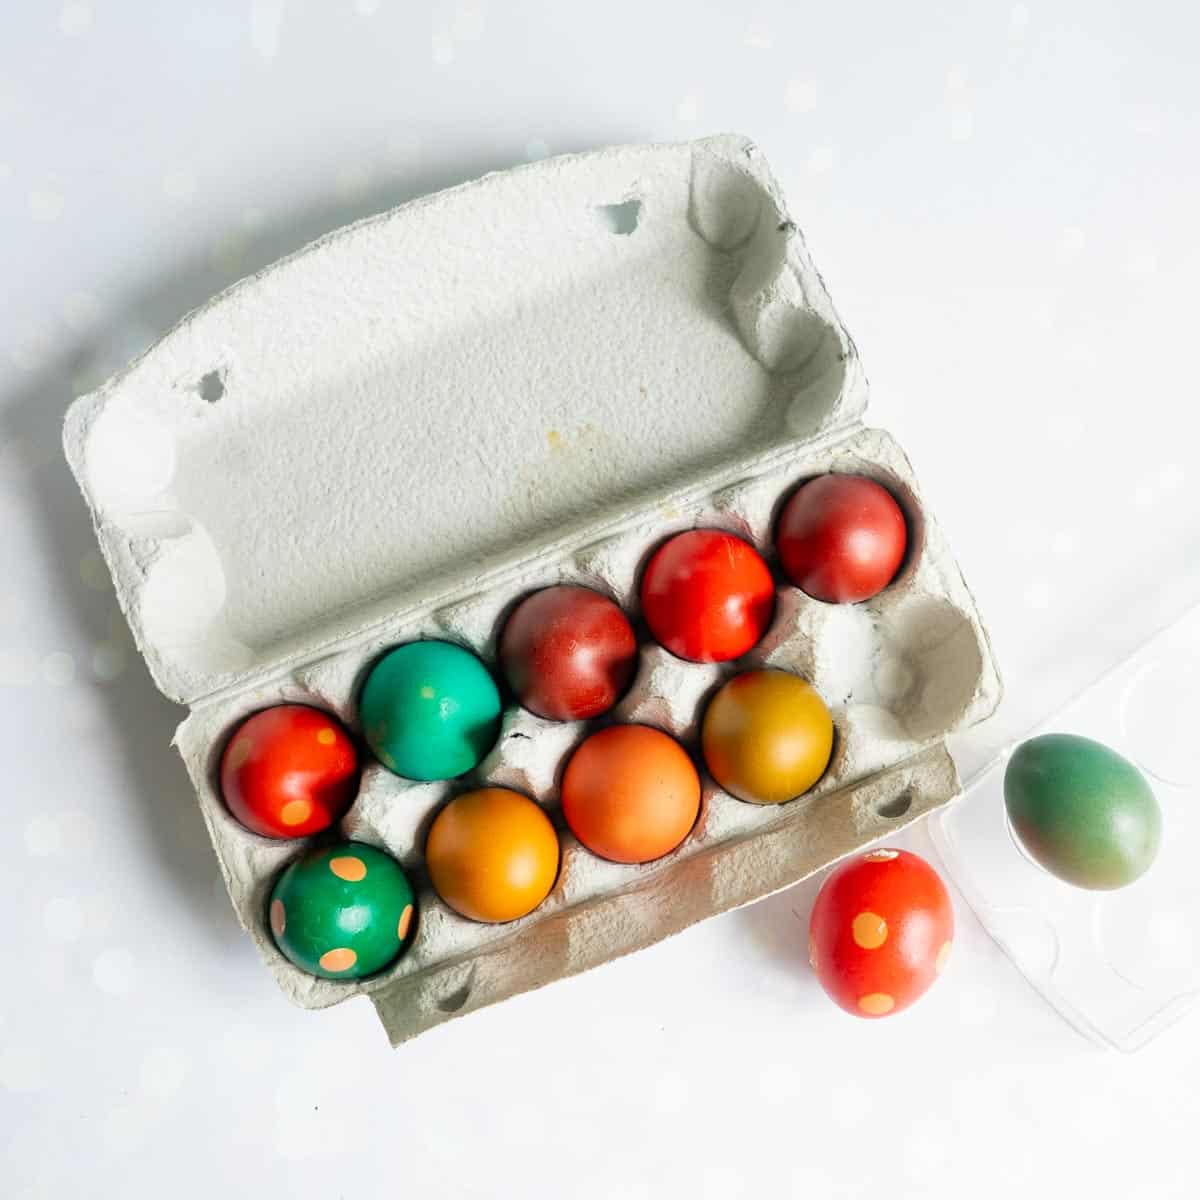 An egg carton filled with 12 coloured eggs.